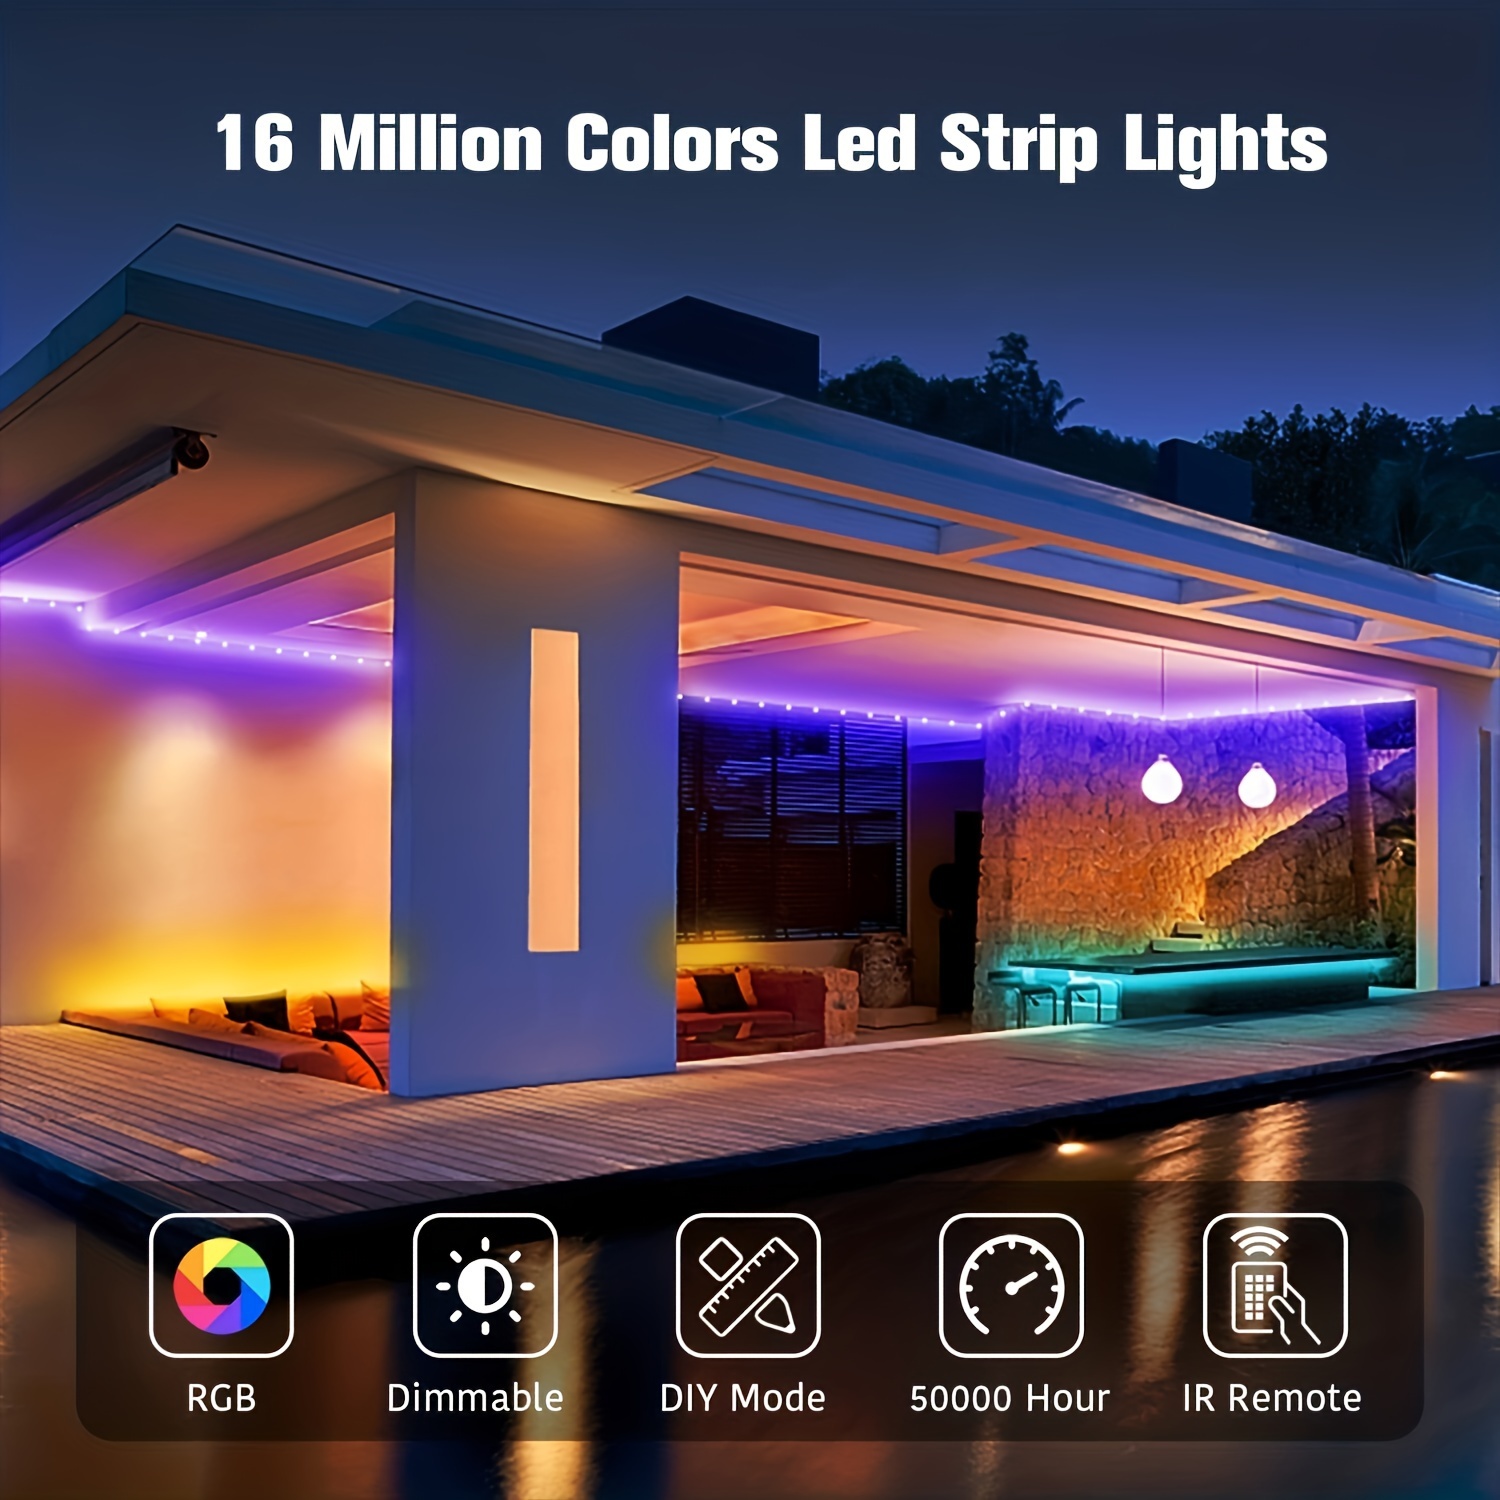 100ft/50ft RGB 2835 LED Strip Lights, Sync Color Changing Function, With 44 Keys Remote Control, 24 Keys APP And 3 Keys Manual Control, For Festival Party, Halloween, Christmas Lighting Lamp details 5